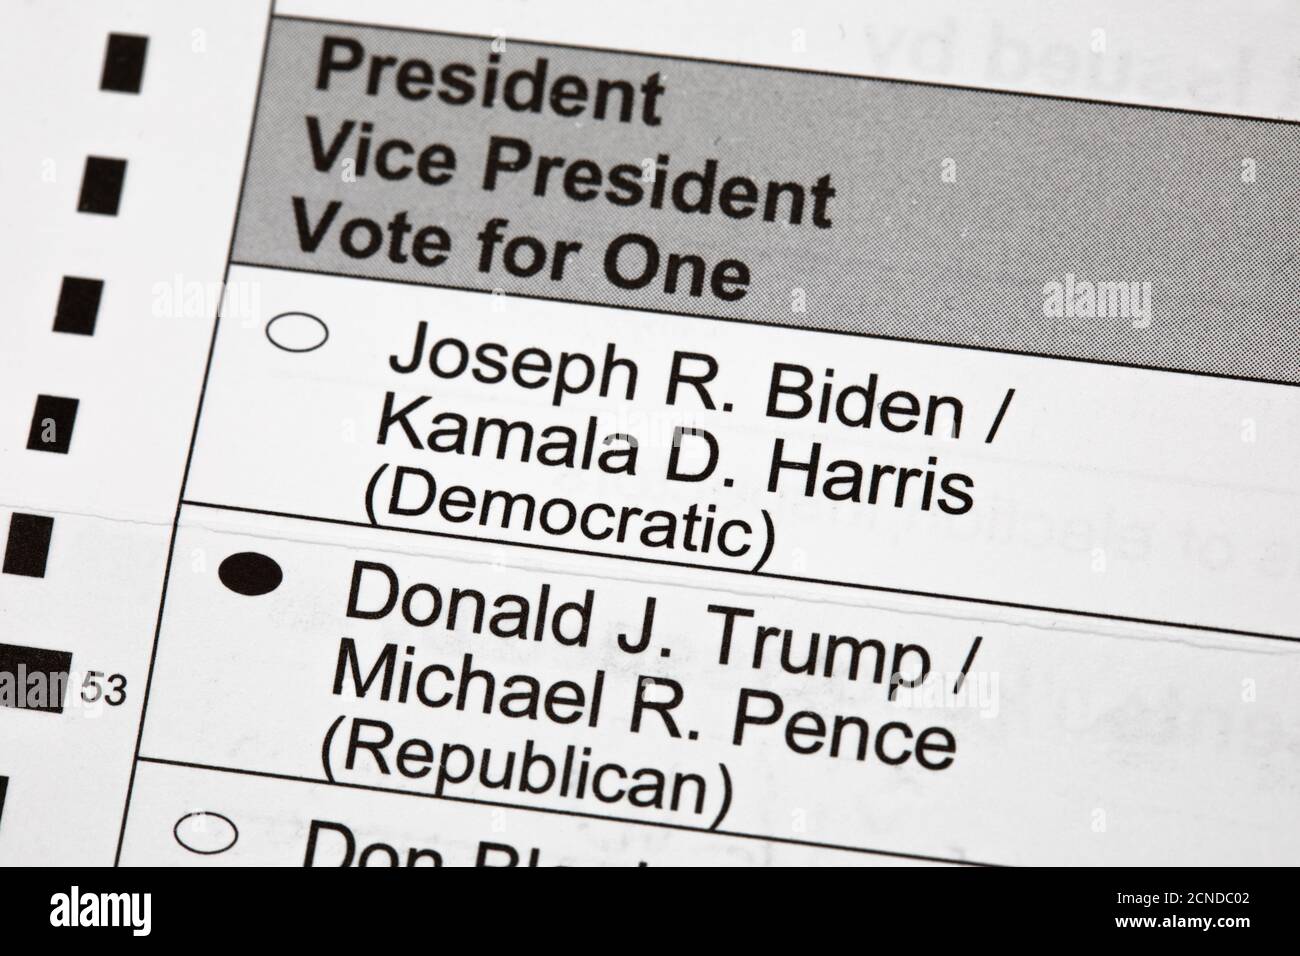 Madison, Wisconsin, USA - September 17, 2020: A 2020 presidential election voting ballot marked to vote for Donald J. Trump for President up close. Stock Photo